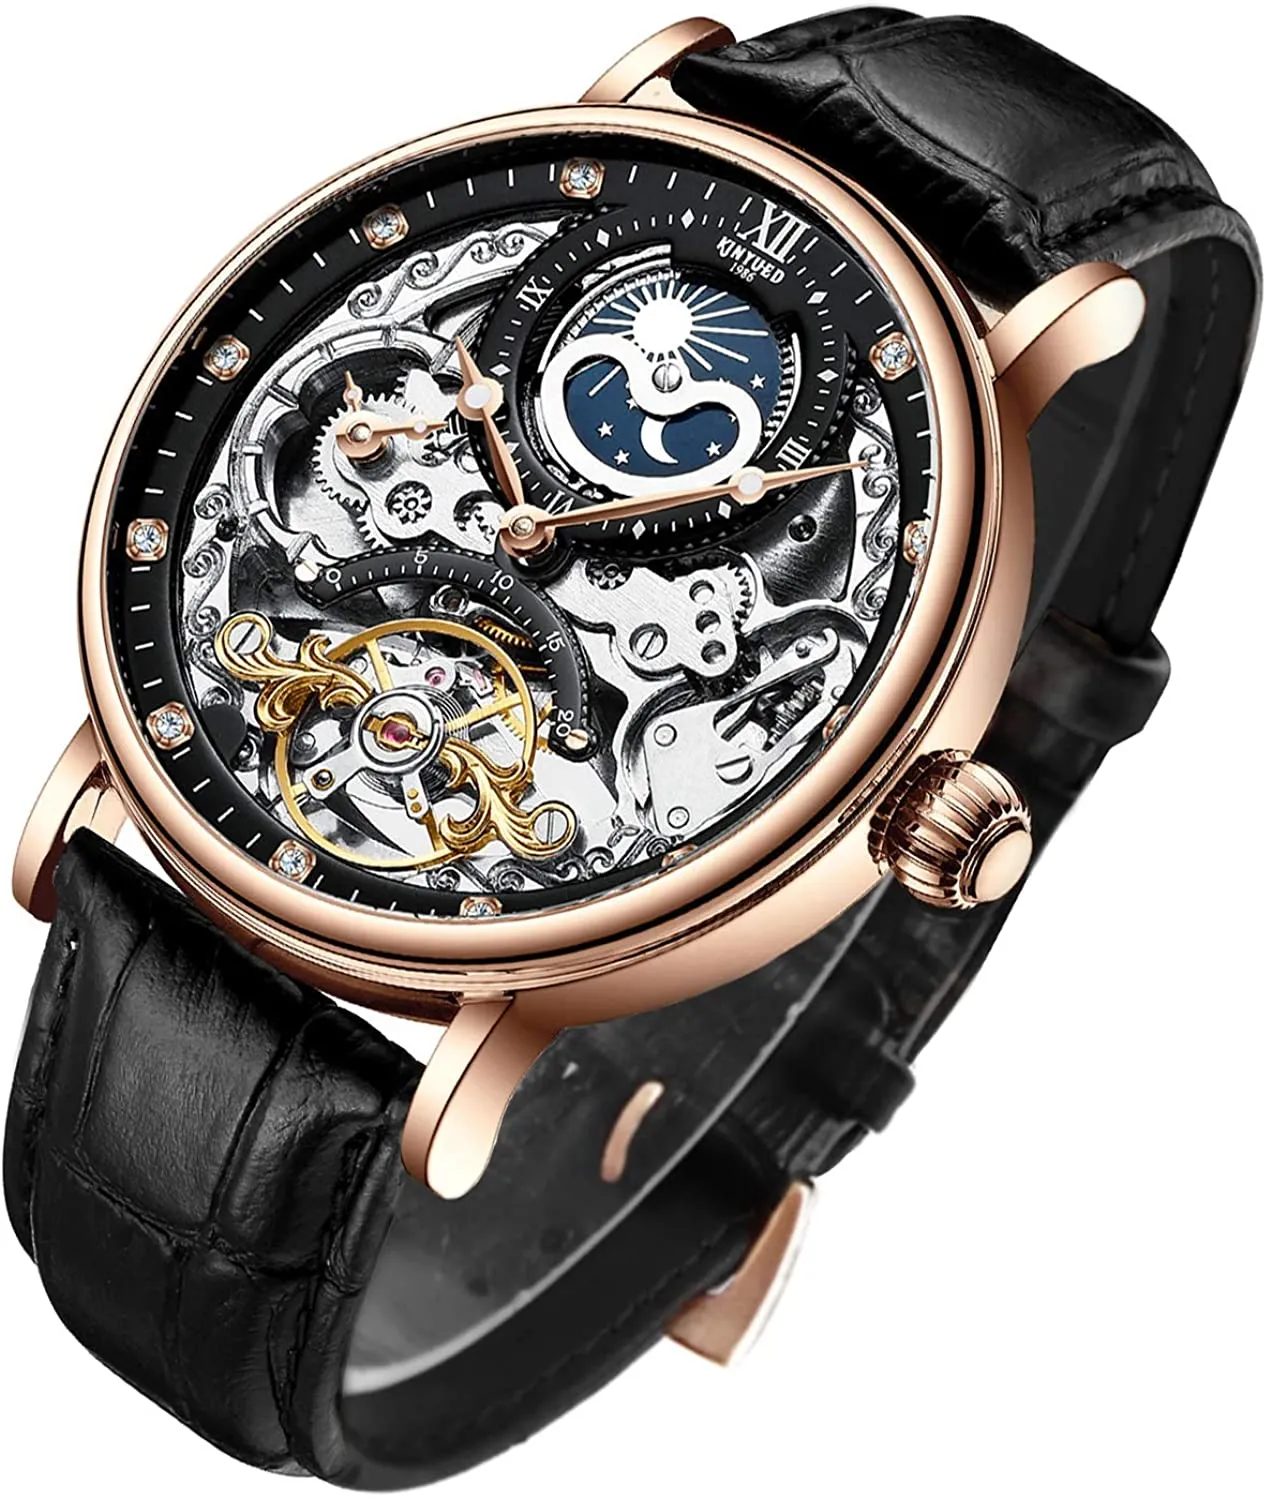 Mens Luxury Skeleton Automatic Mechanical Wrist Watches Leather Moon Frase Luminous Hands Self-Wind Wristwatch234i